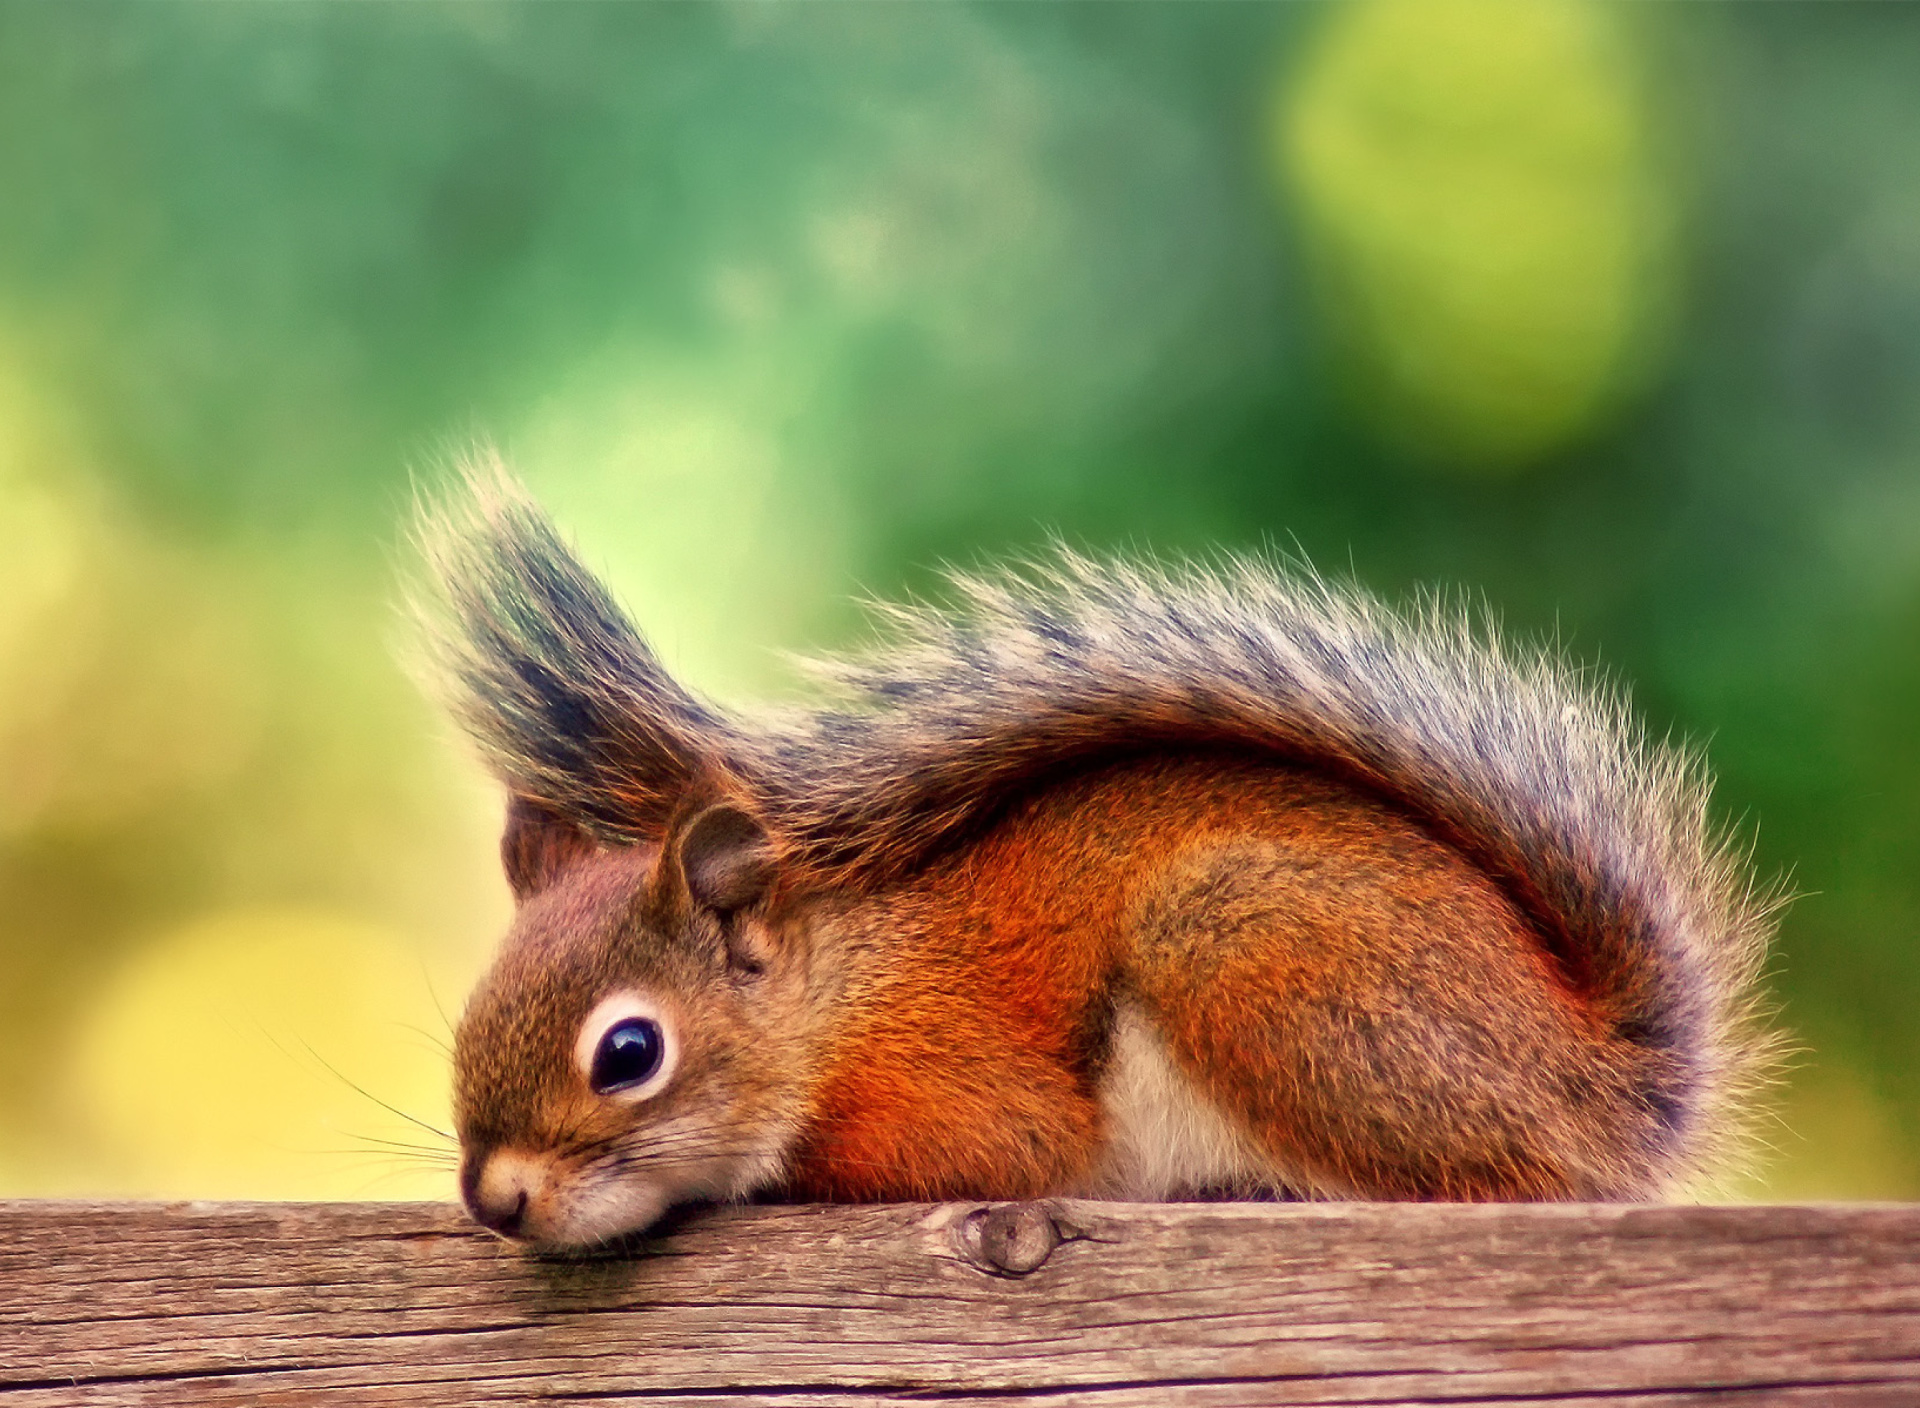 American red squirrel wallpaper 1920x1408